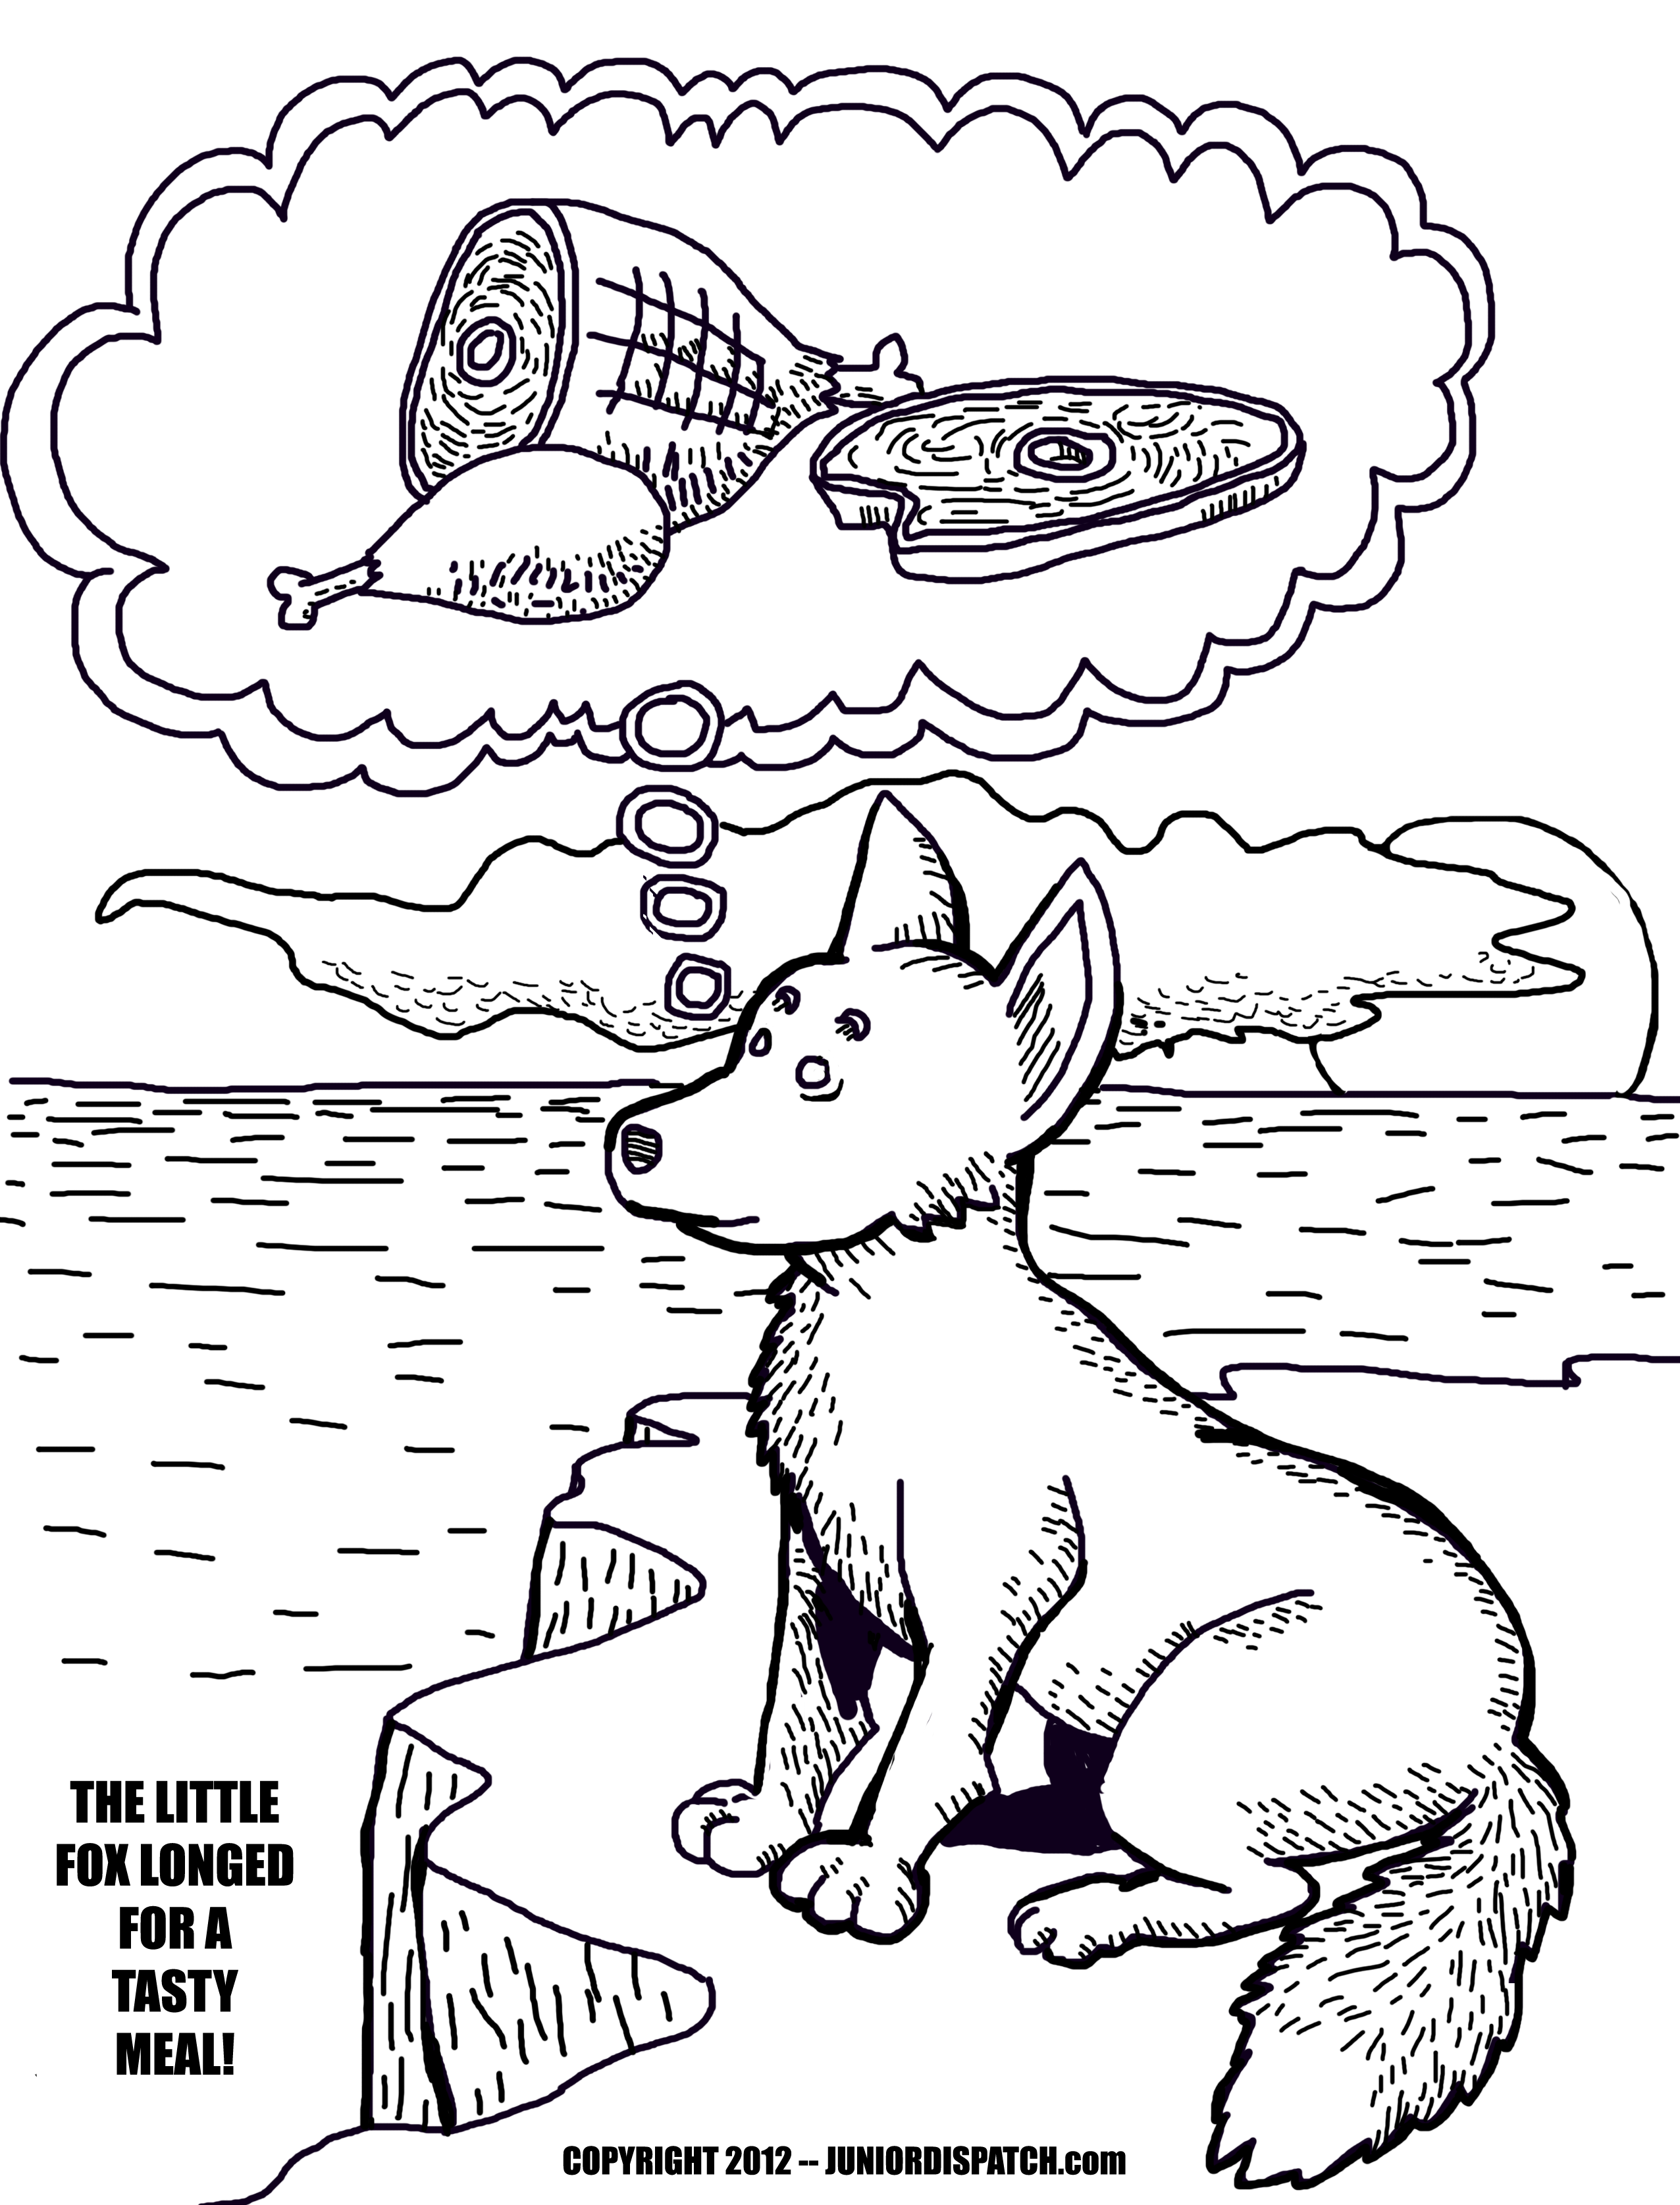 Arctic Water Coloring Page - Coloring Pages For All Ages